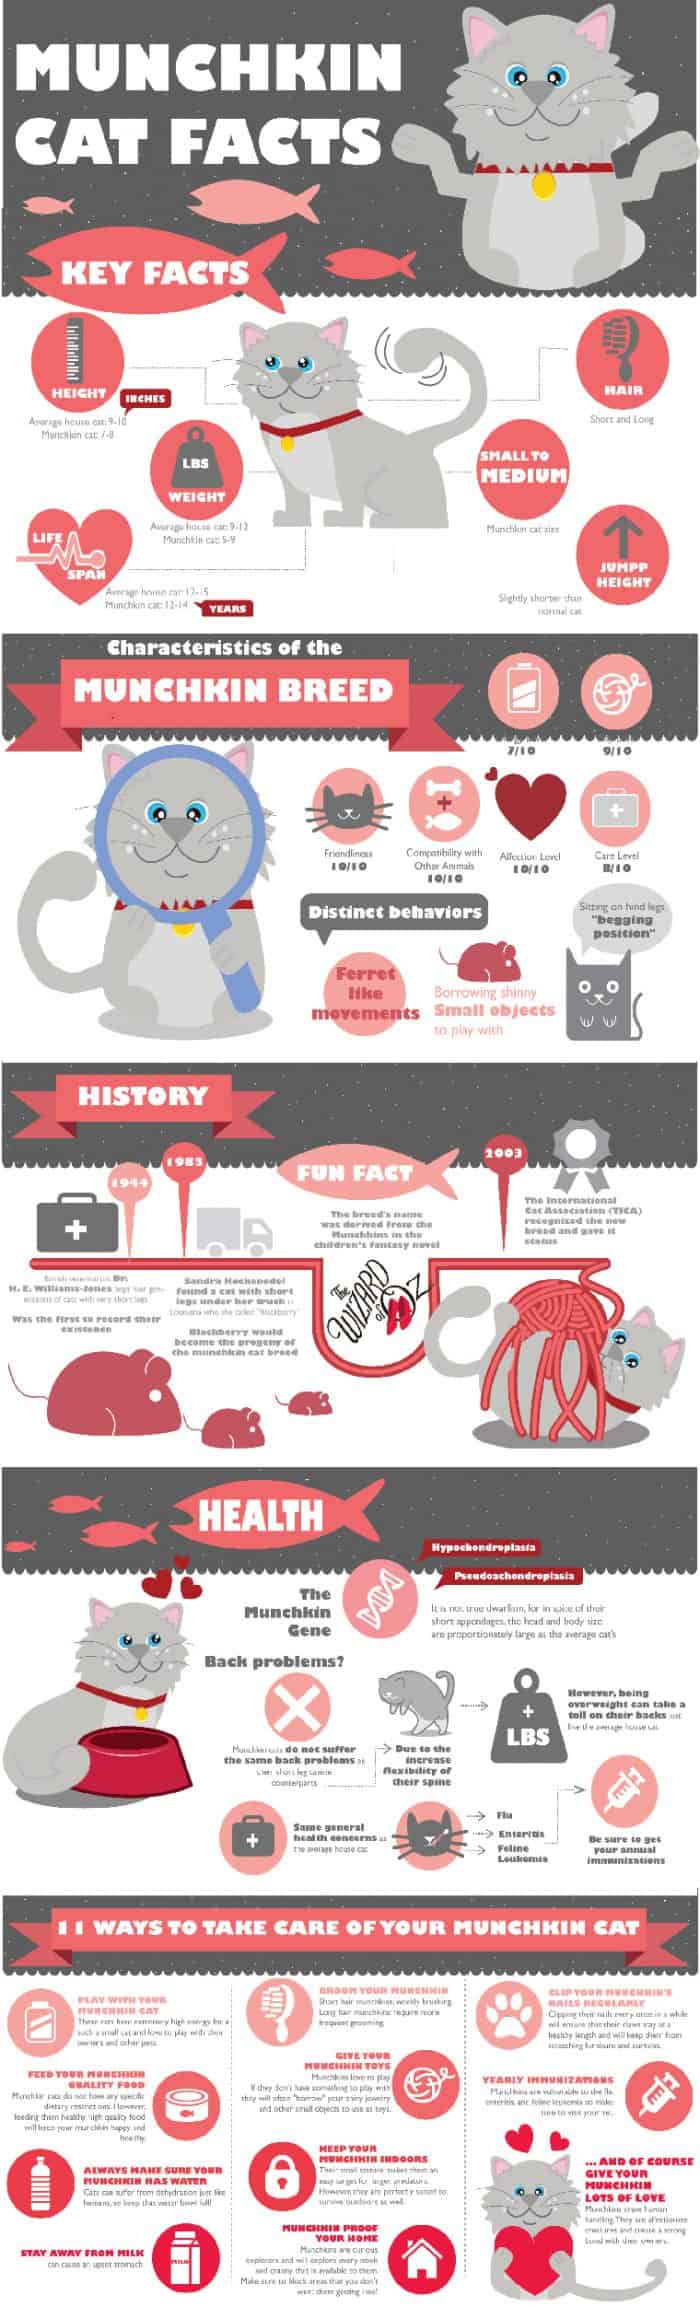 information about munchkin cats, how long munchkin cats live, why they're controversial, and whether munchkin cats are ethical